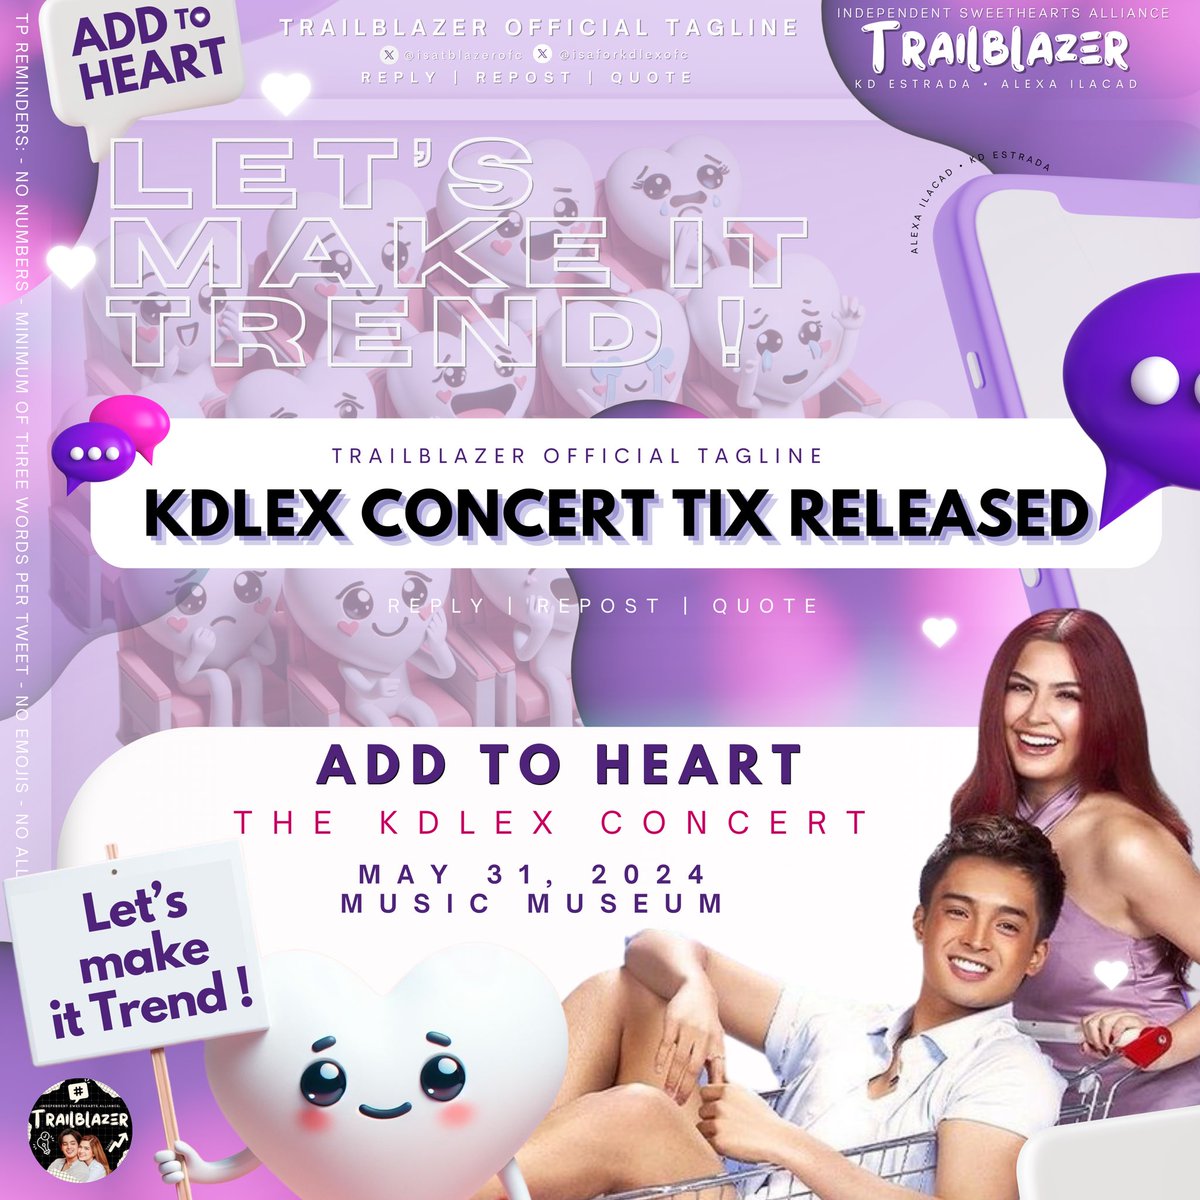 X Party! Sweethearts and Solids! OFFICIAL TAGLINE: KDLEX CONCERT TIX RELEASED #Kdlex #AddToHeartKDLEXConcert Kindly drop the tag if you see this post. Thank you! @kdestrada_ @alexailacad